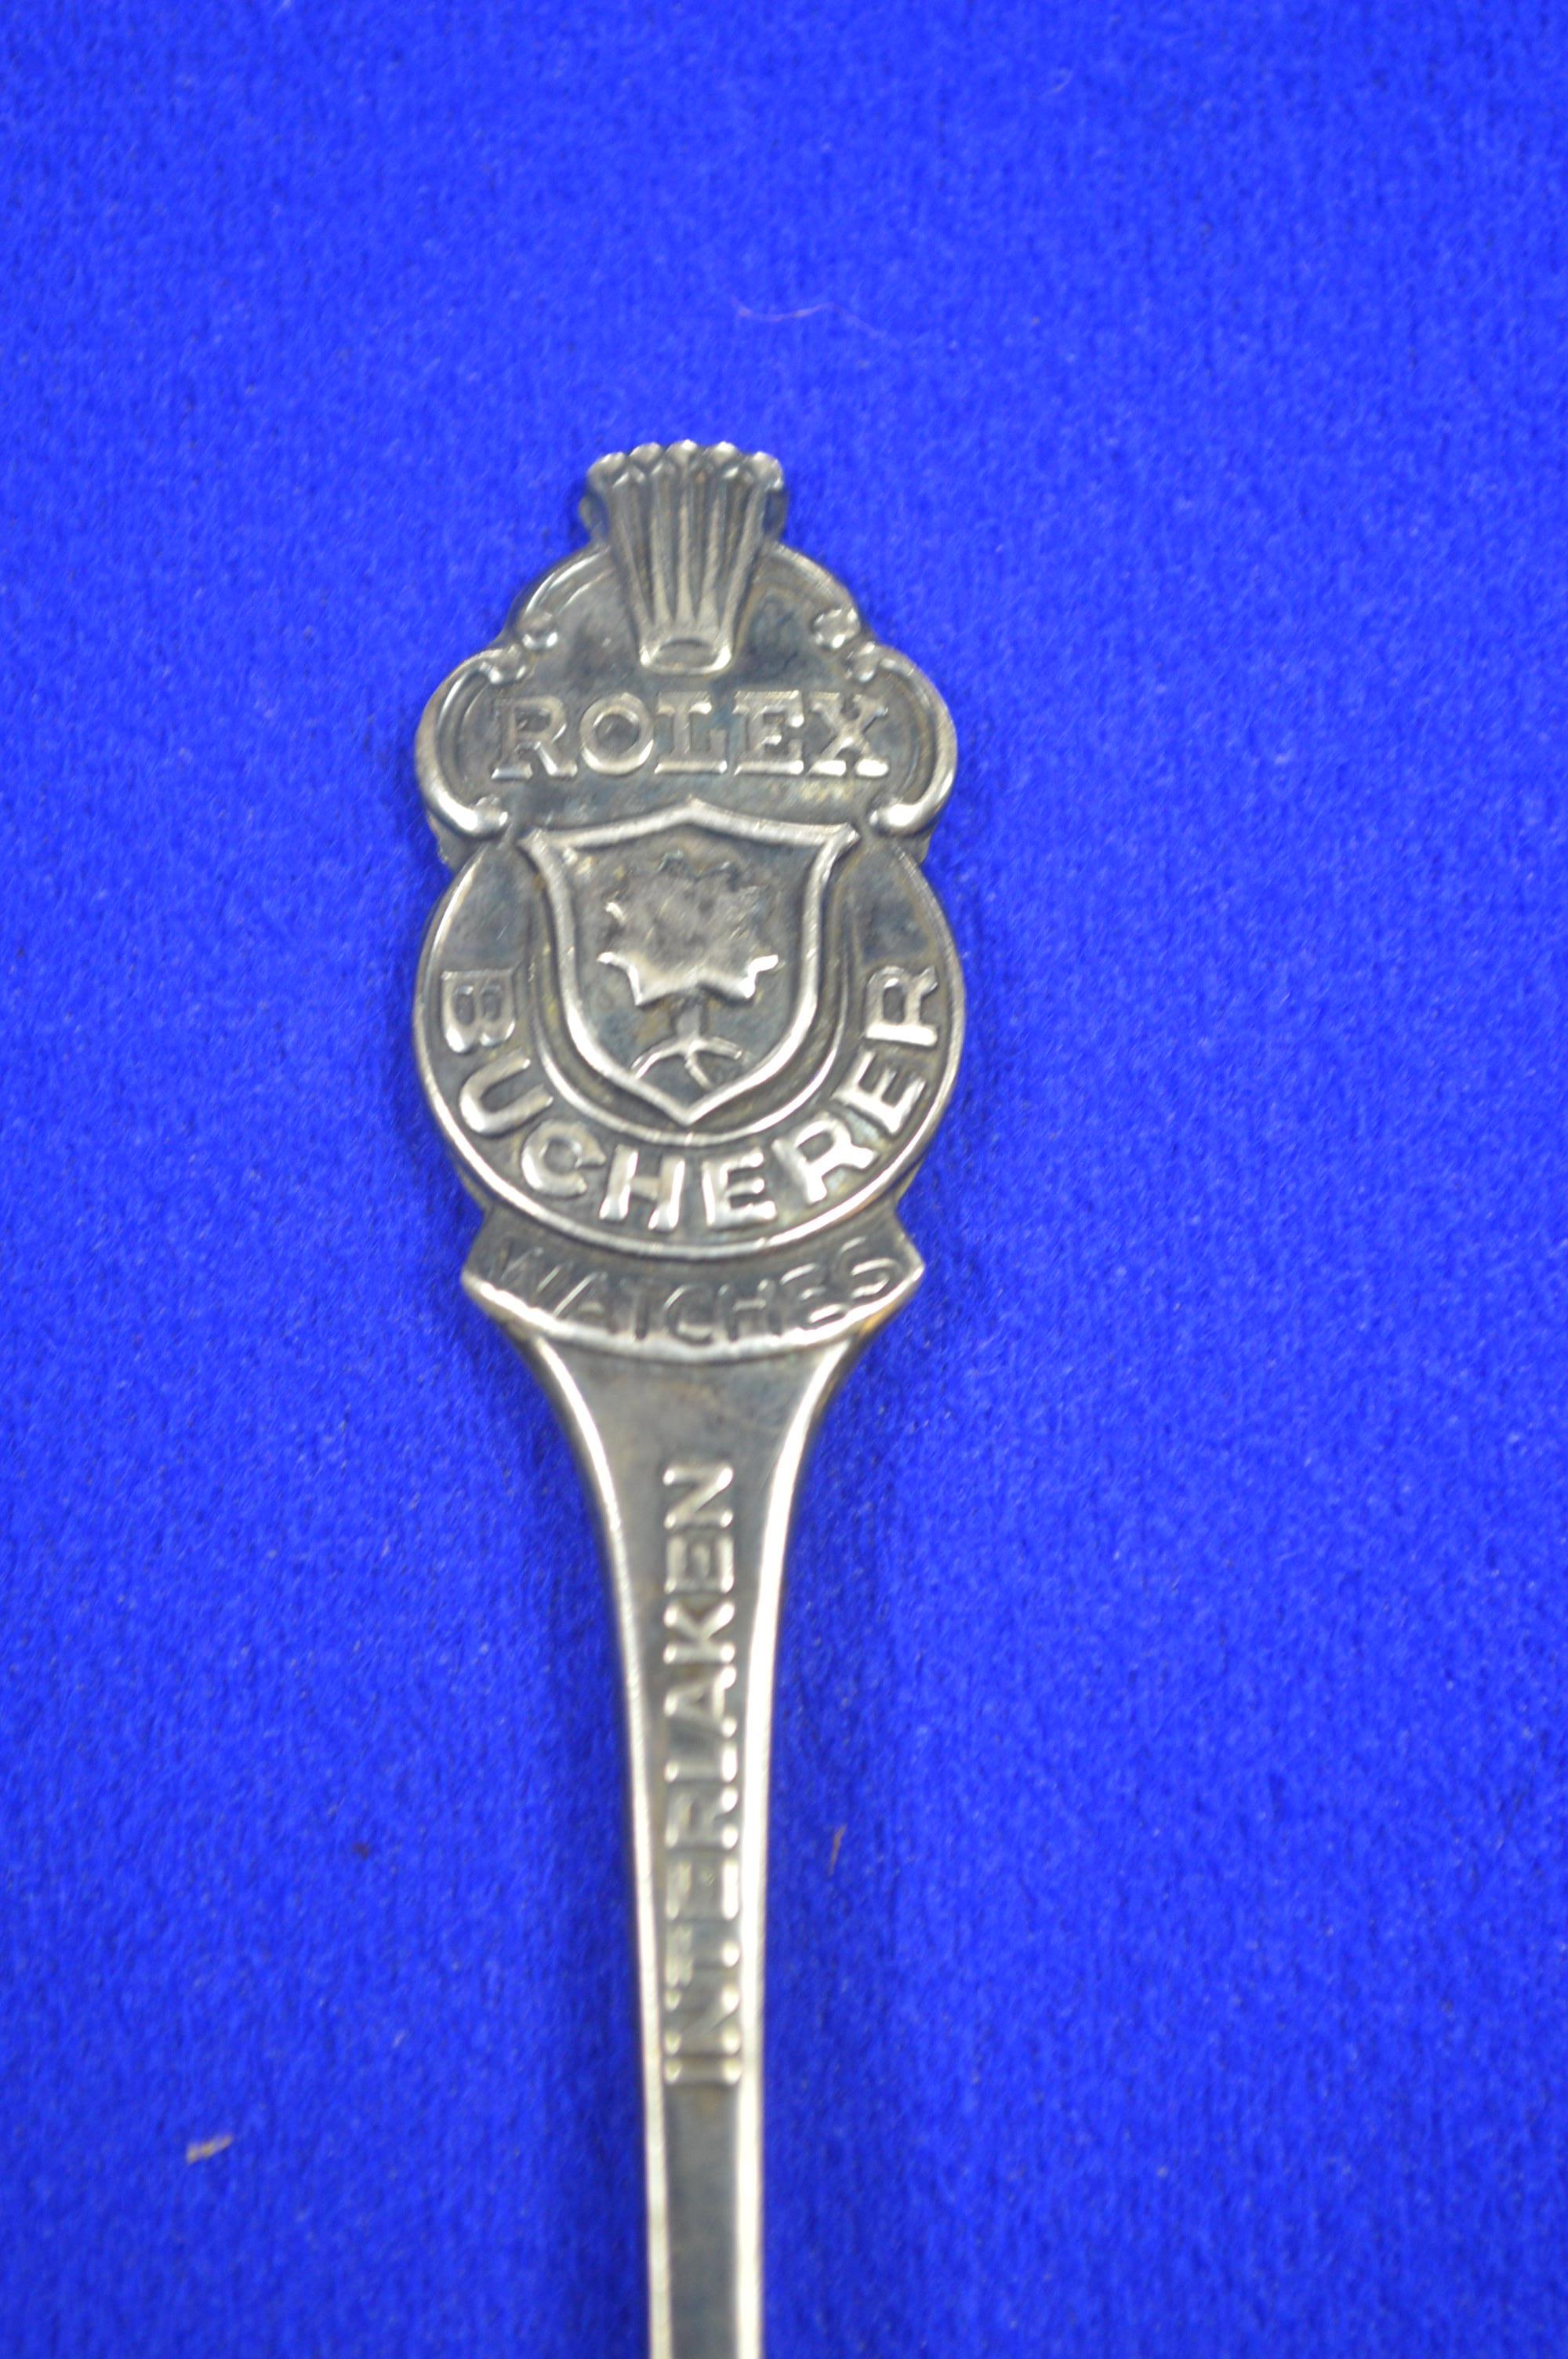 Rolex Watches Promotional Silver Spoon - Image 2 of 2